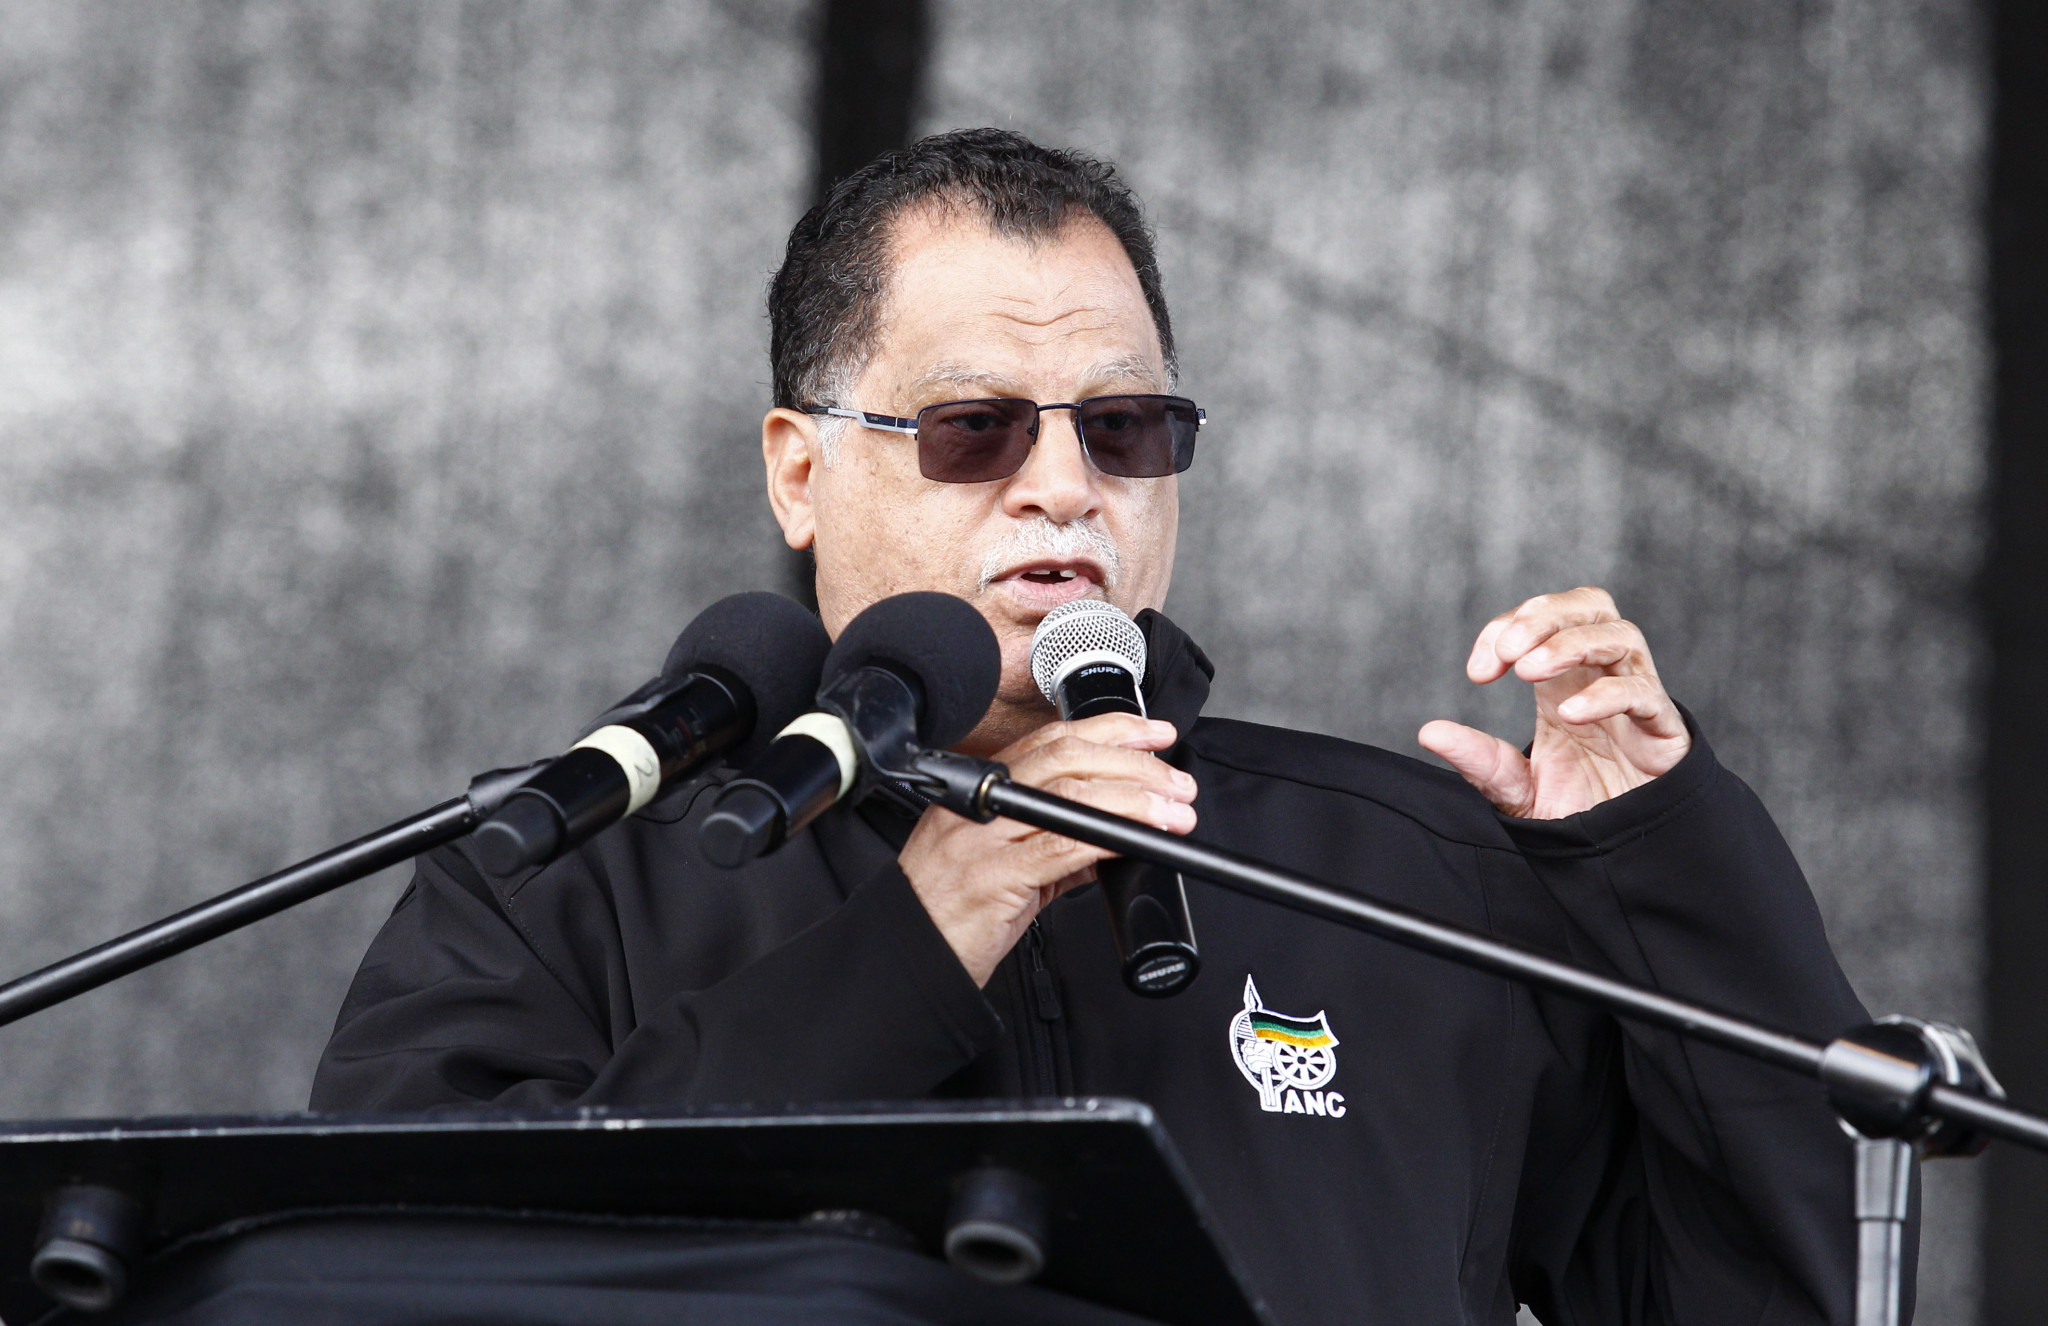 Danny Jordaan is facing an accusation of rape ©Getty Images